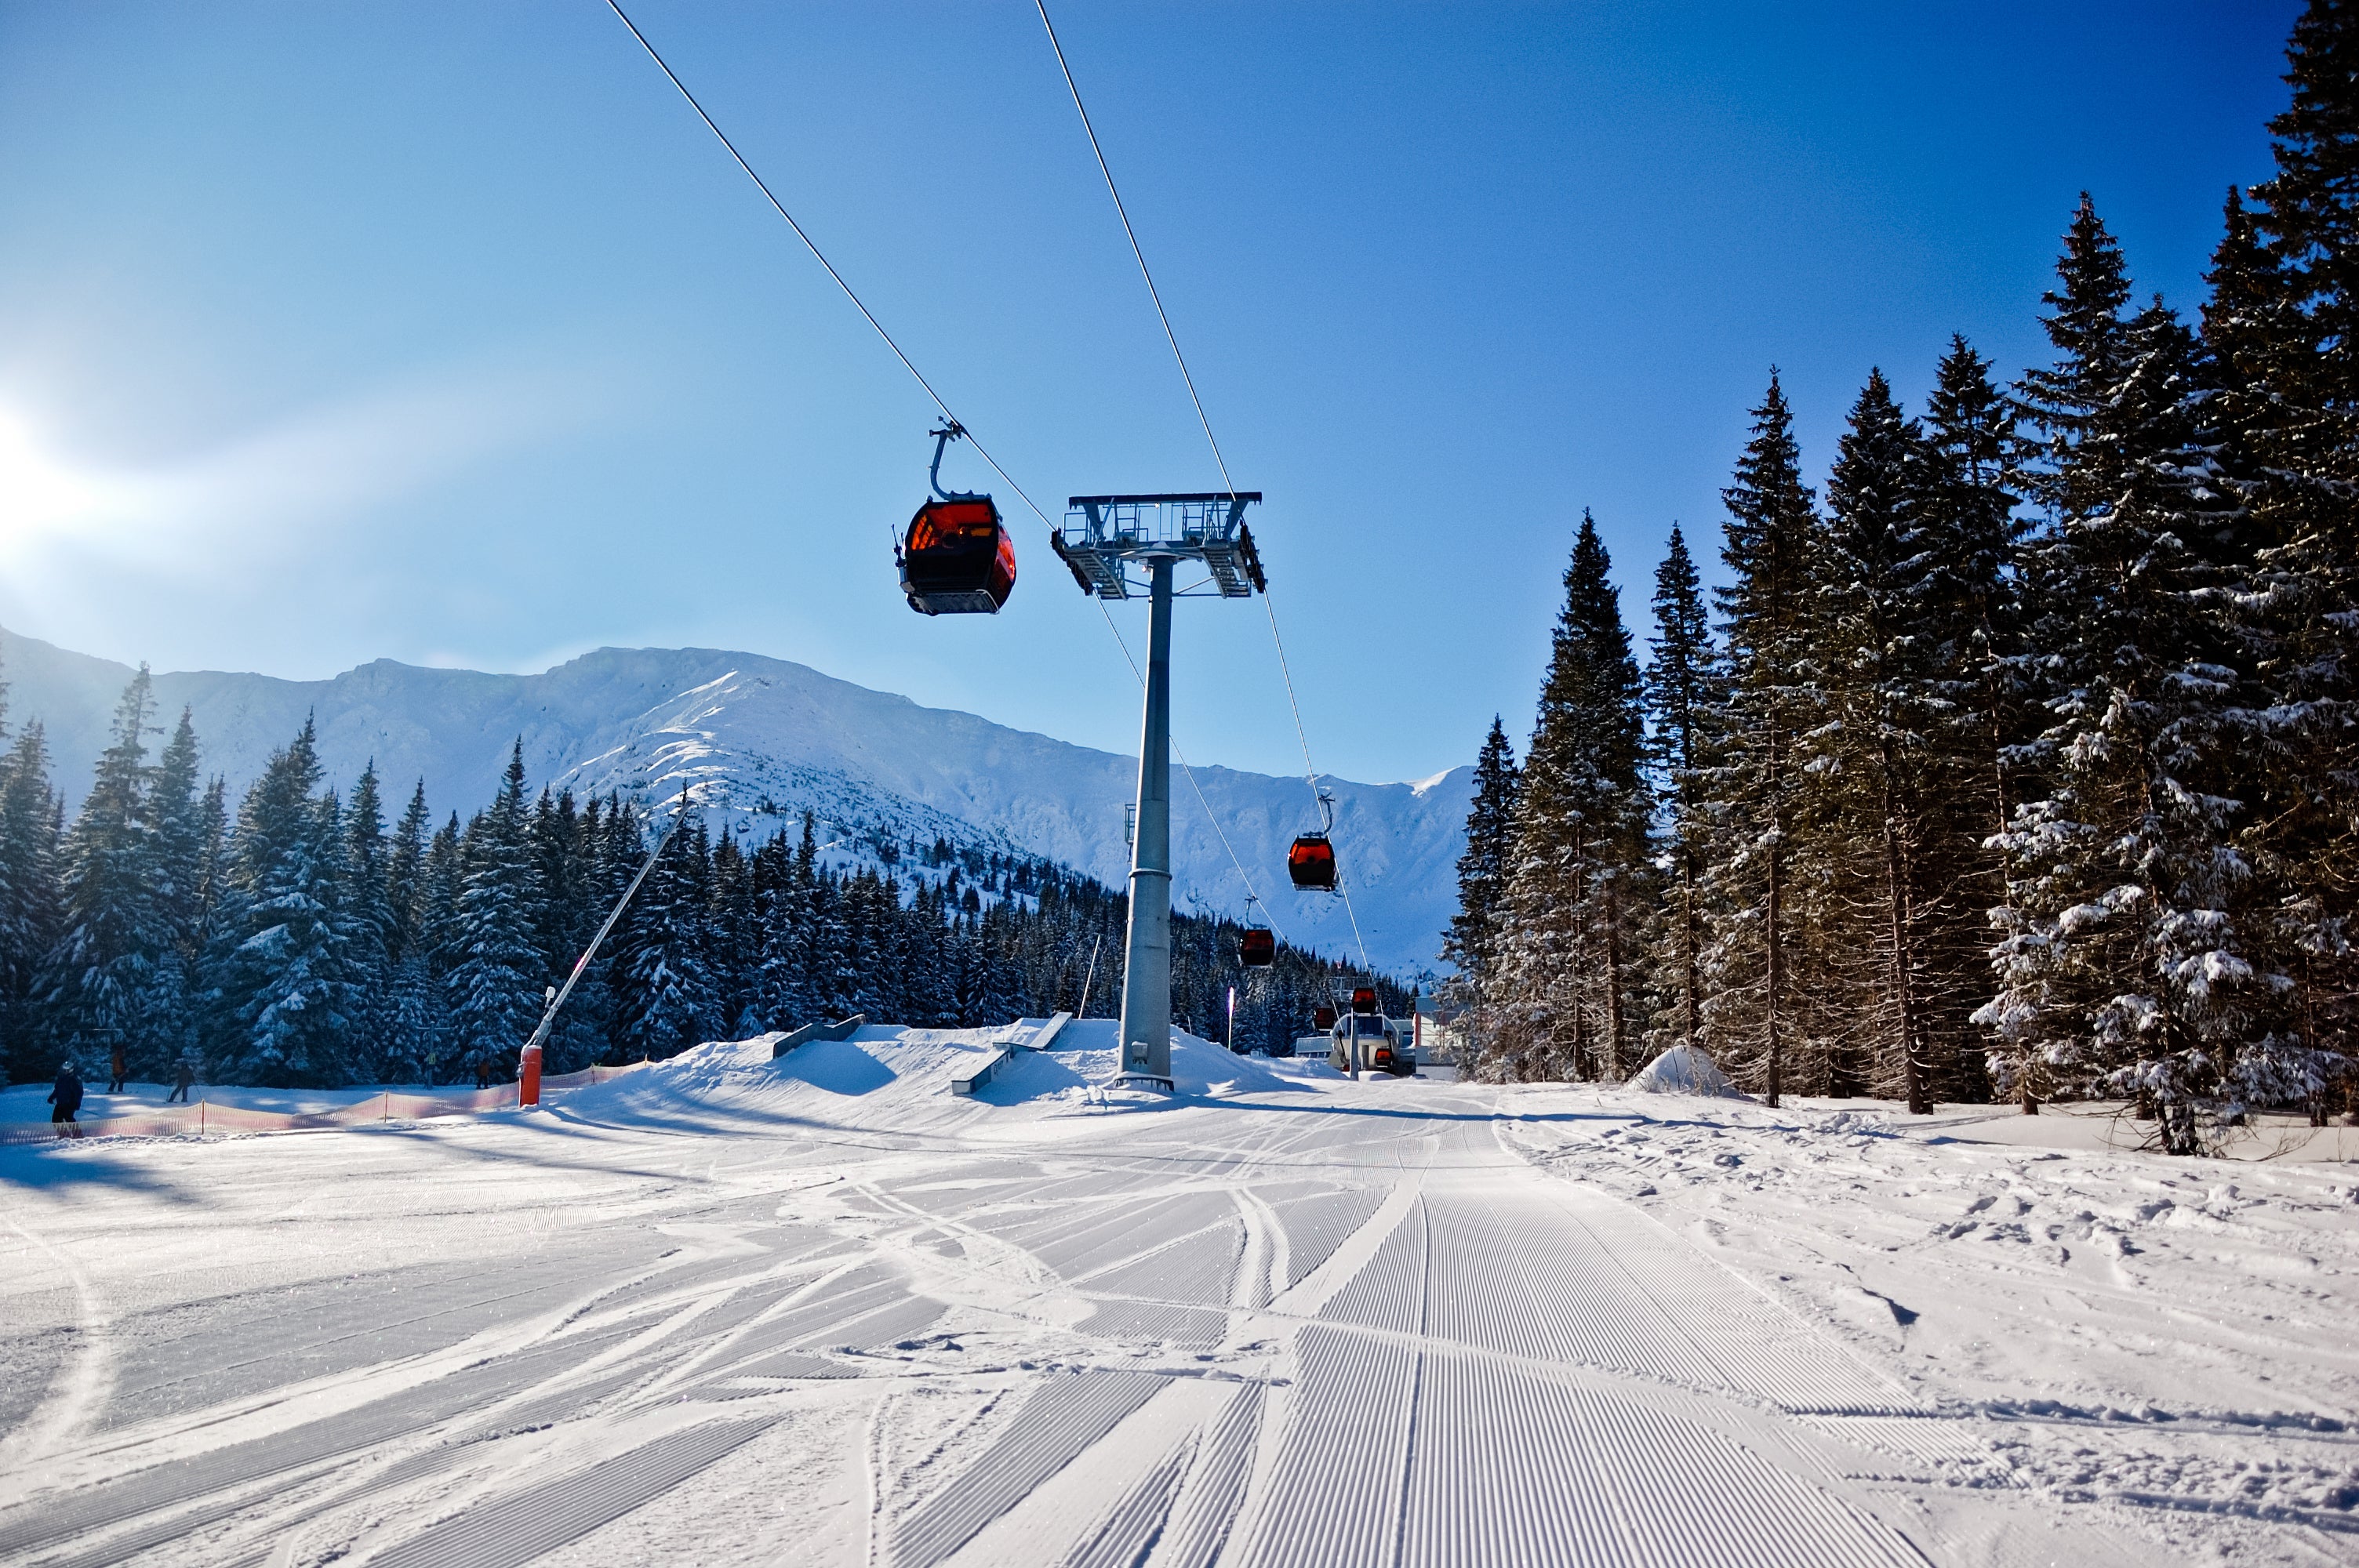 Slovakia’s largest ski resort, Jasna, offers gentle blues and family-run inns off-piste